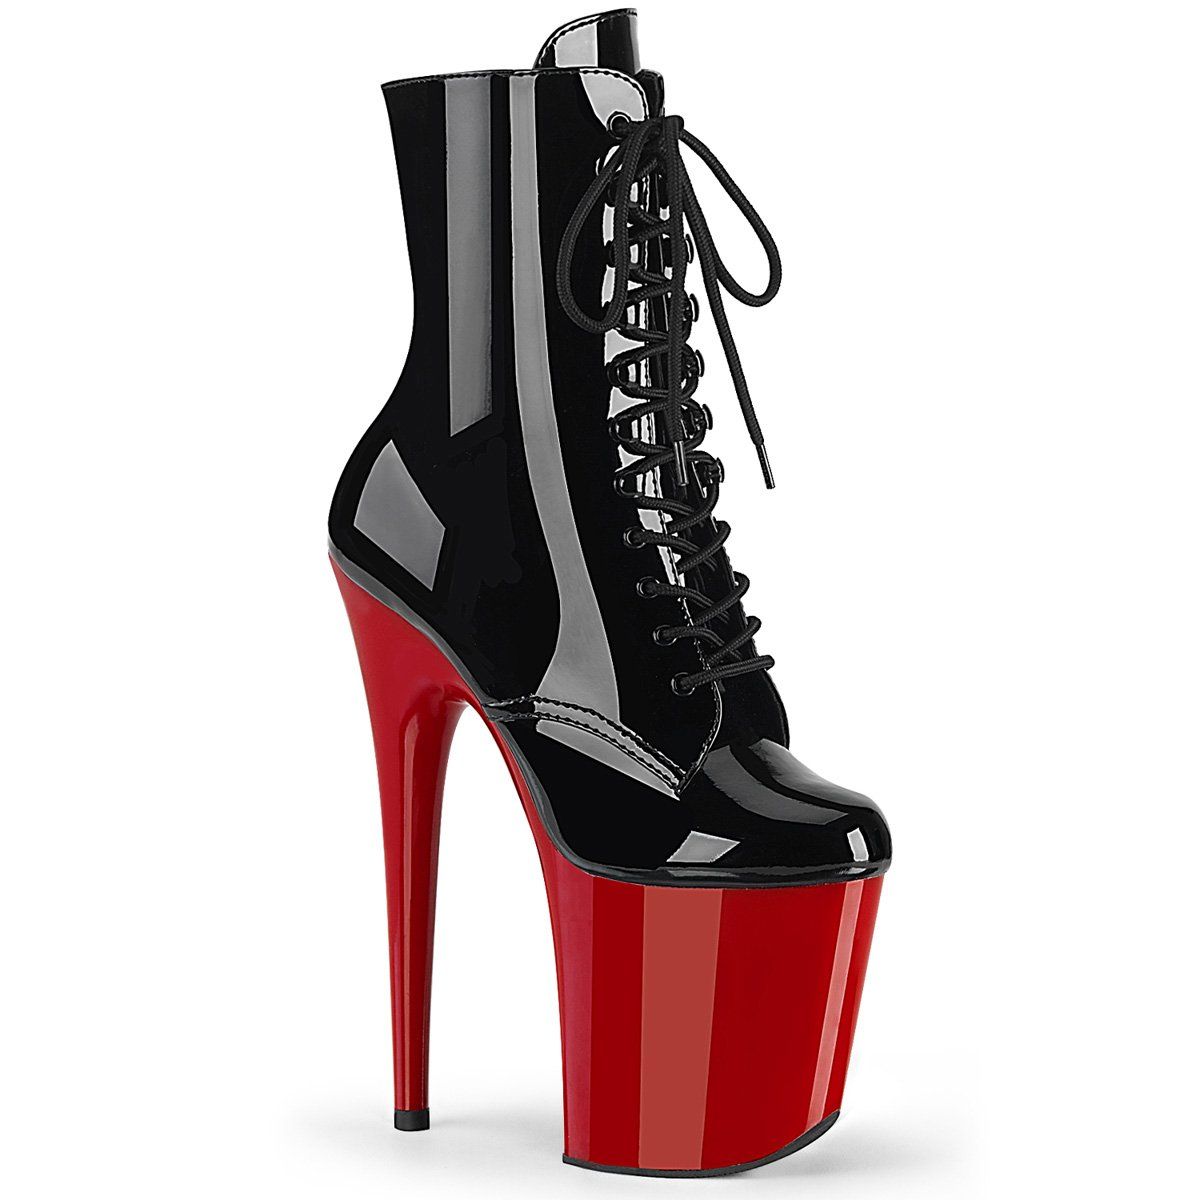 FLAMINGO-1020 Black Patent/Red Ankle Boot Pleaser